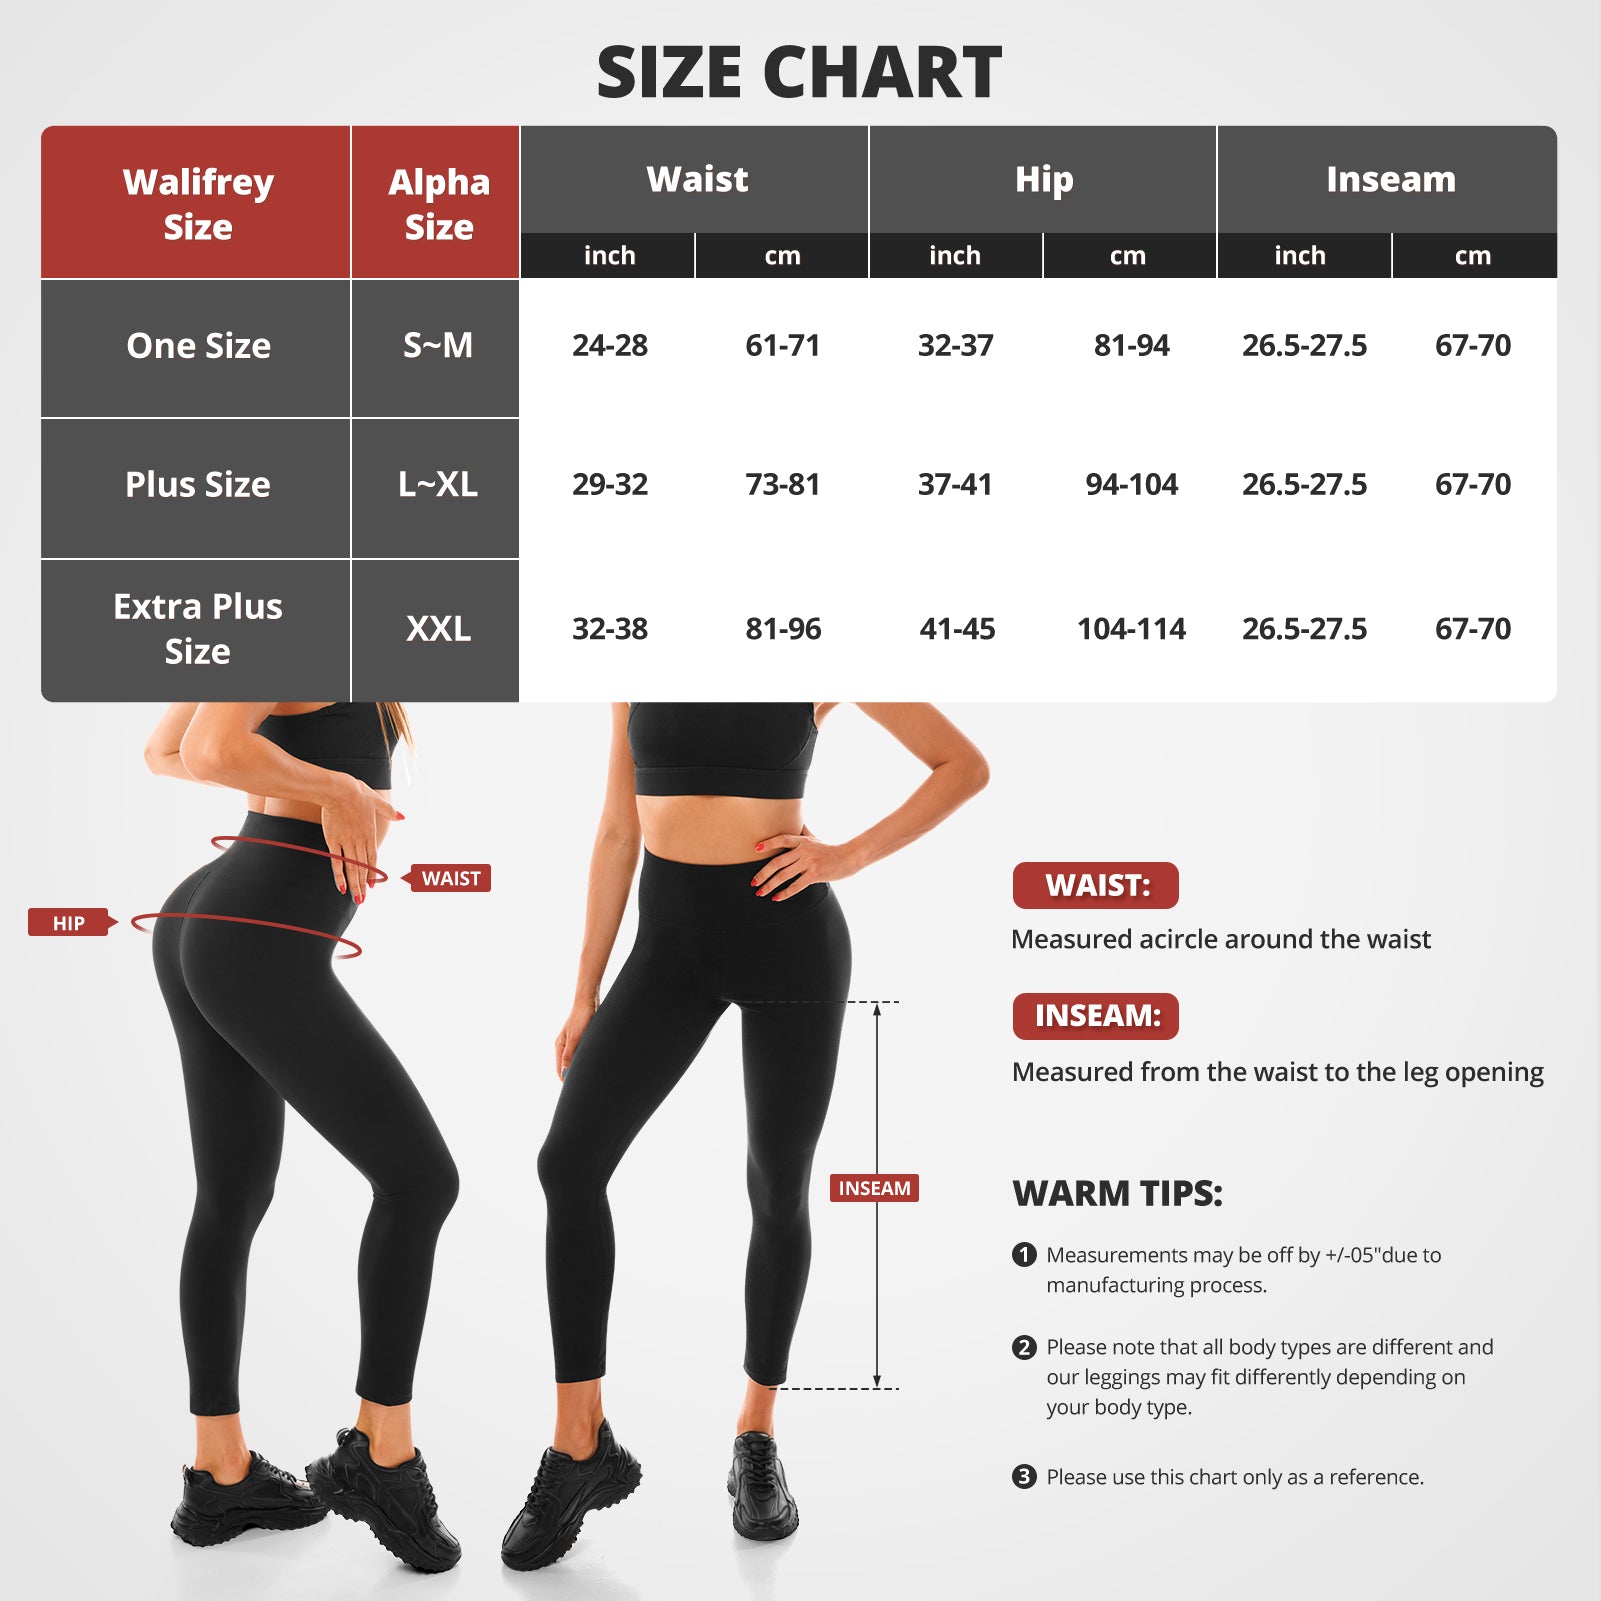 Gym Leggings for Women ZIP IT! Black-White E-store repinpeace.com - Polish  manufacturer of sportswear for fitness, Crossfit, gym, running. Quick  delivery and easy return and exchange